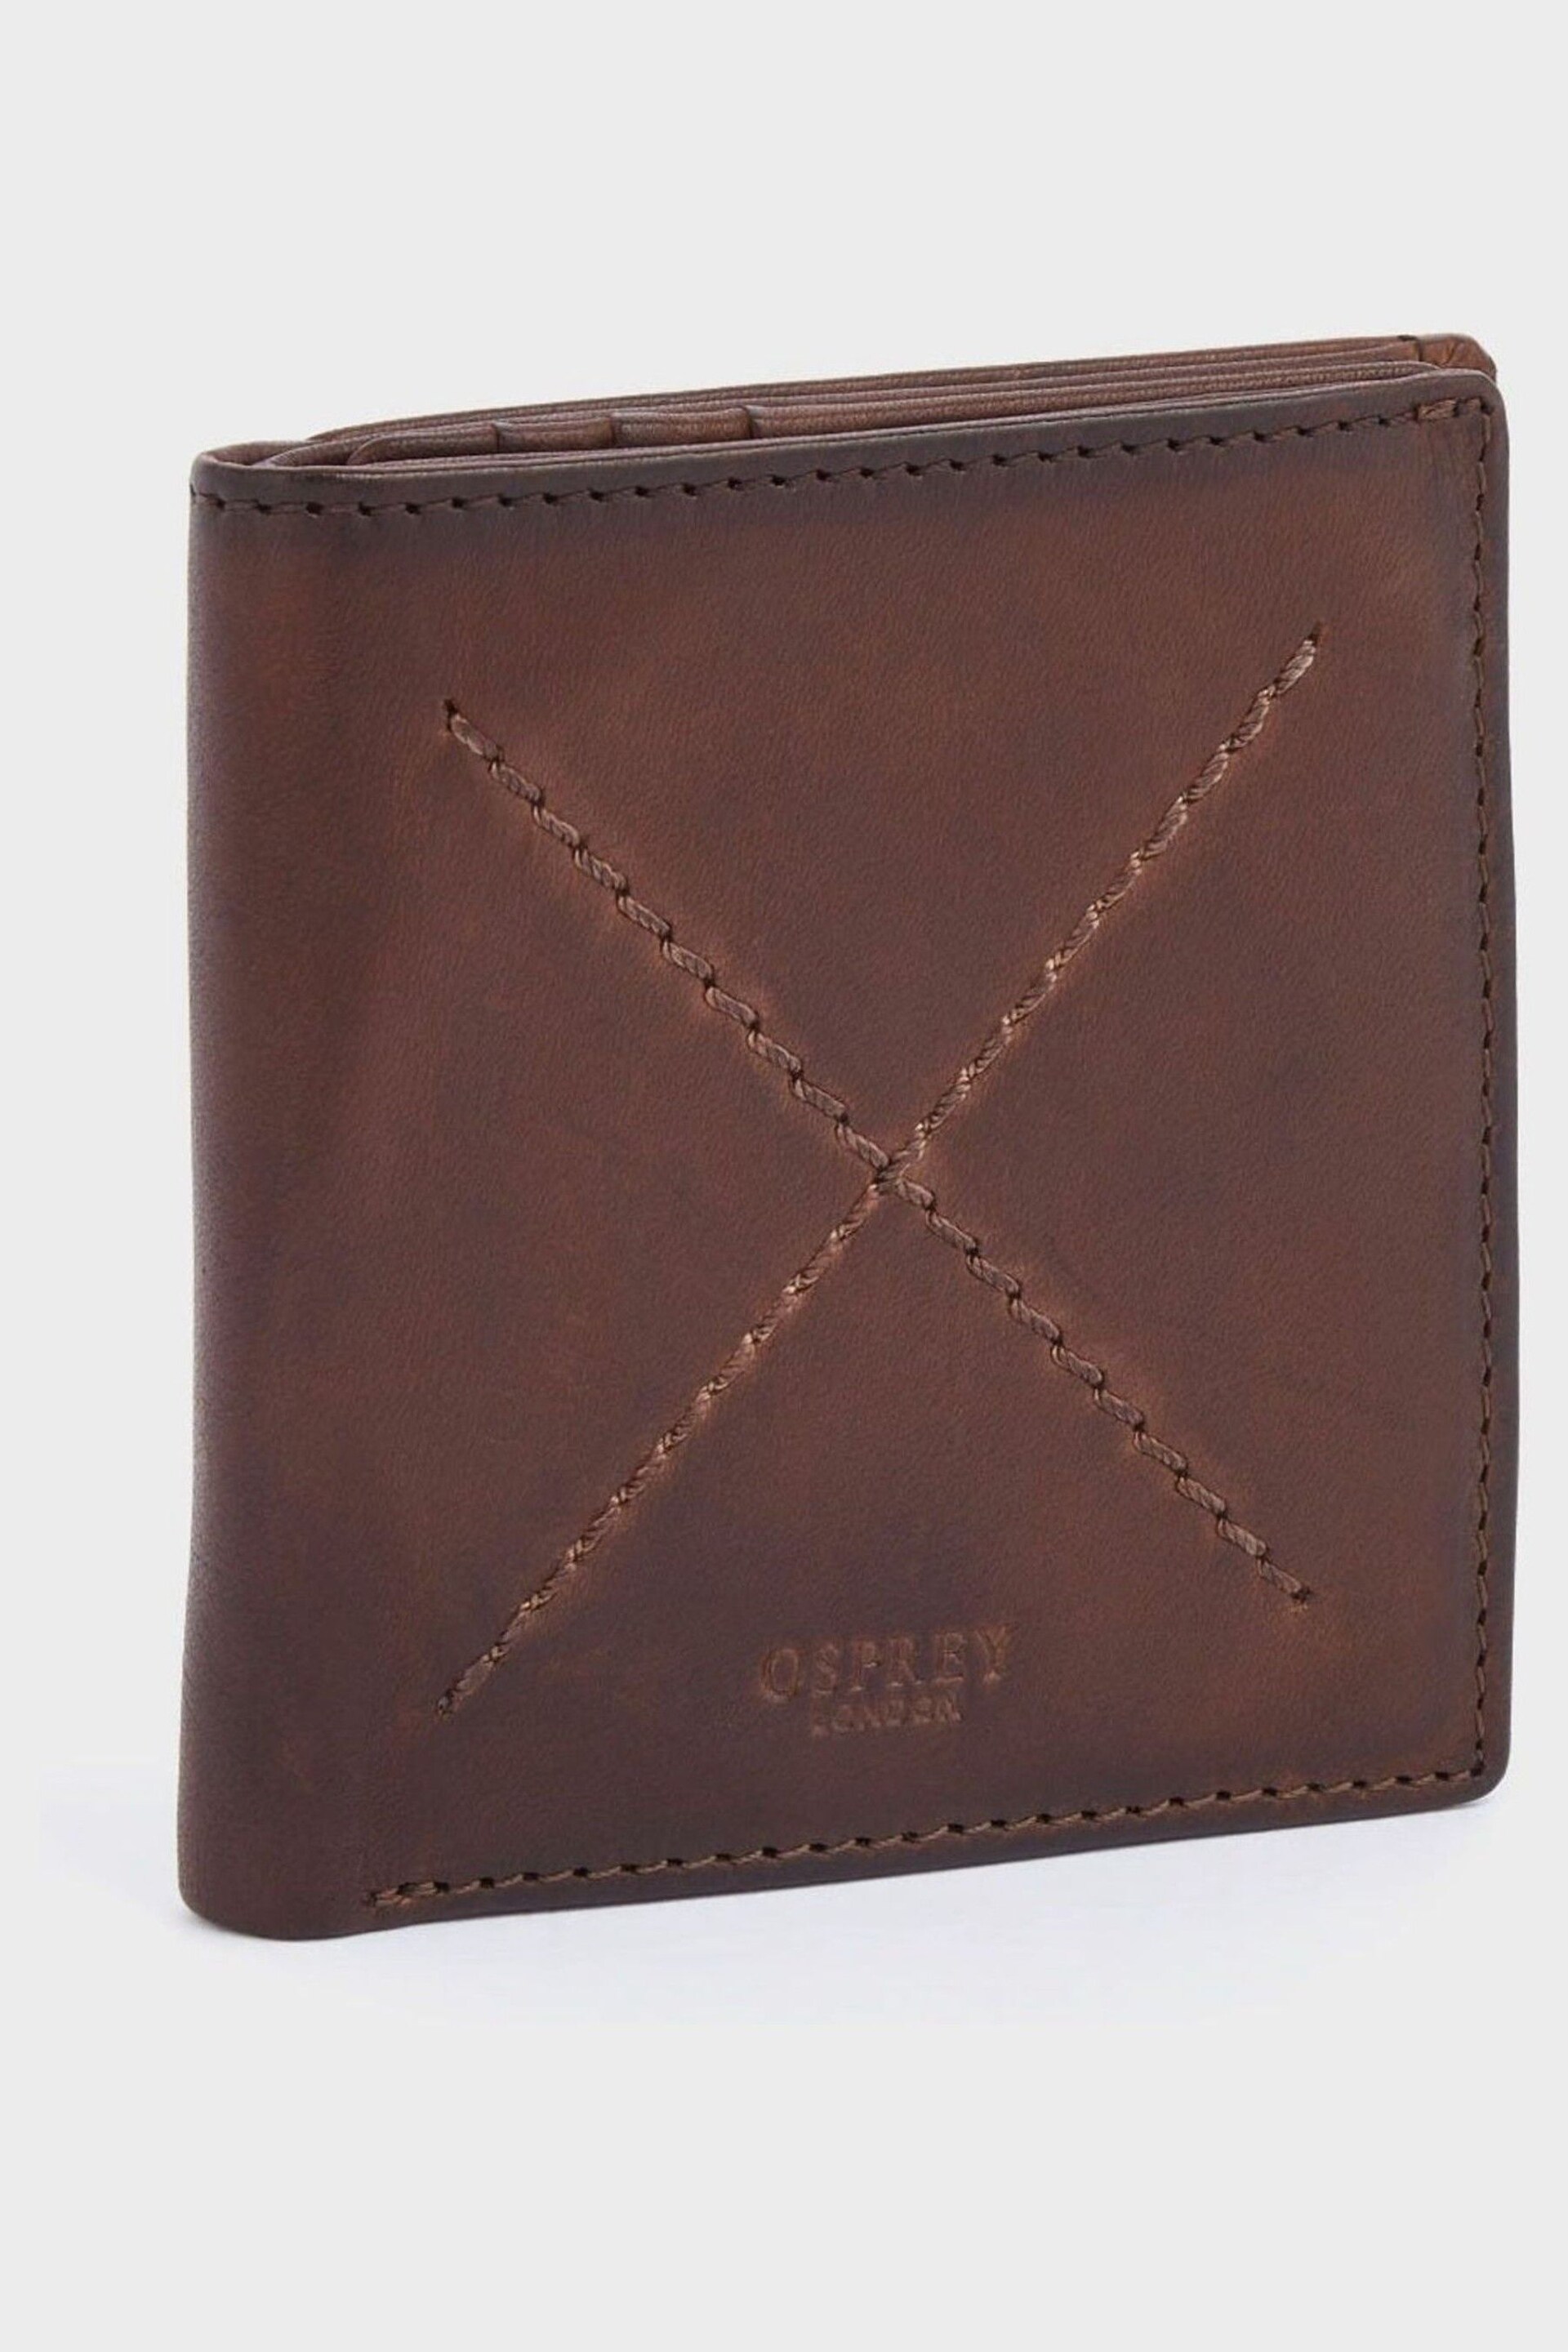 OSPREY LONDON The X Stitch Leather RFID ID Cardholder Brown Wallet - Image 2 of 6